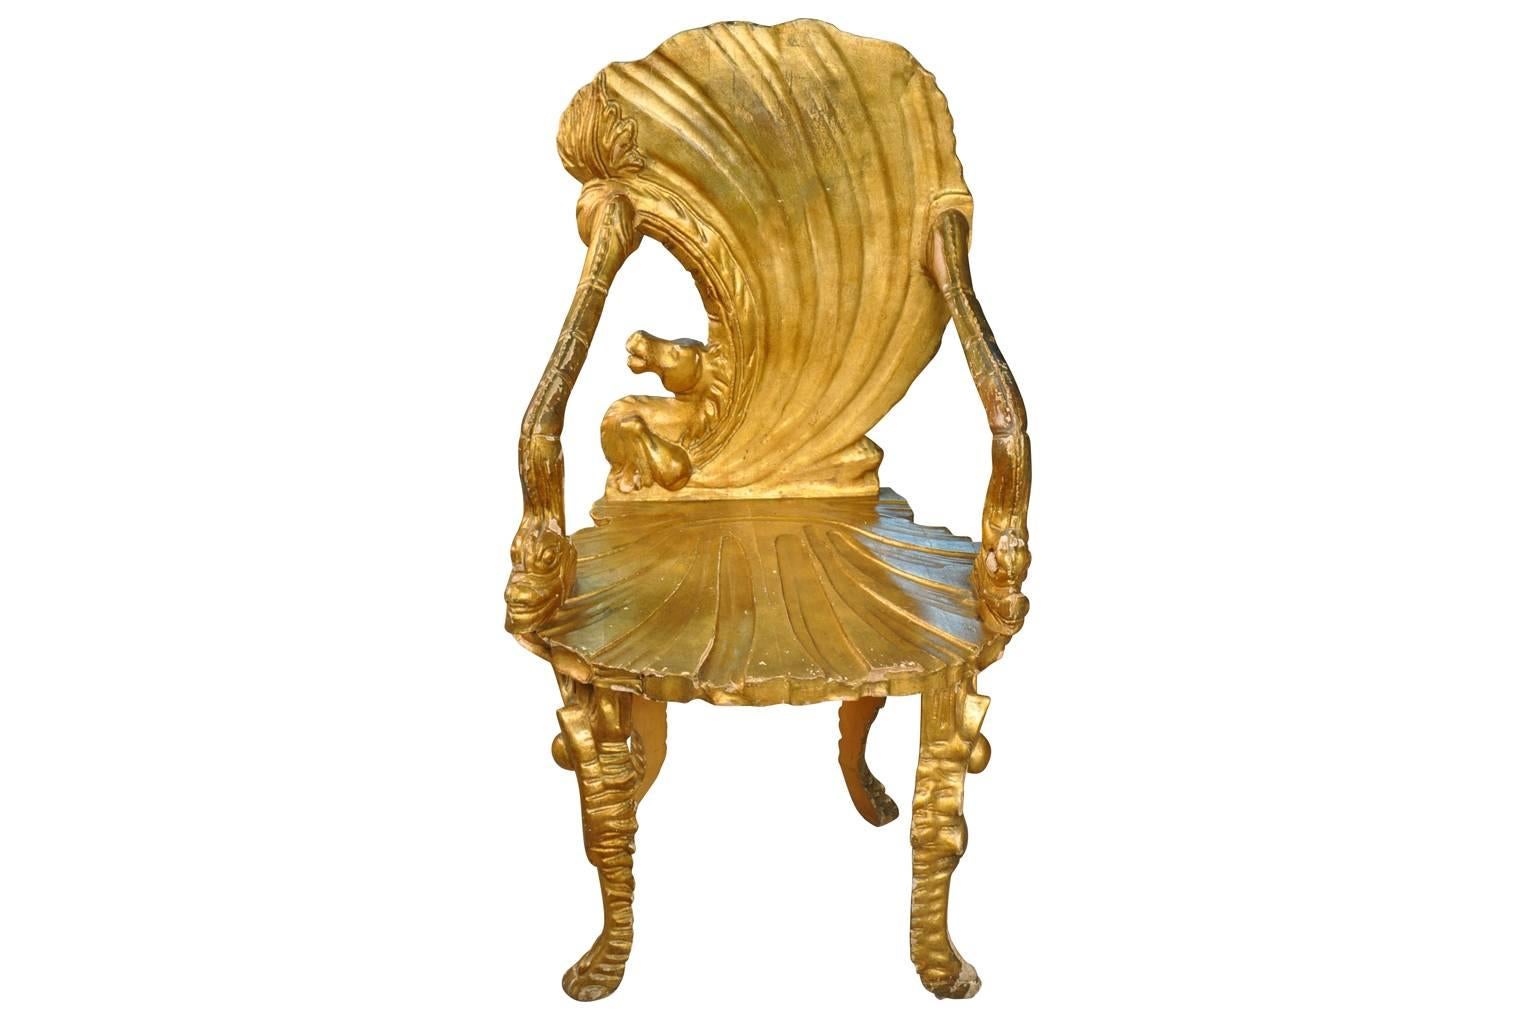 A stunning 19th century Venetian Grotto armchair in giltwood. Hand-carved with the seat and back in the form of an open scallop shell. The armrests are in the form of dolphins and supported by conch shell legs. A very striking decorative piece